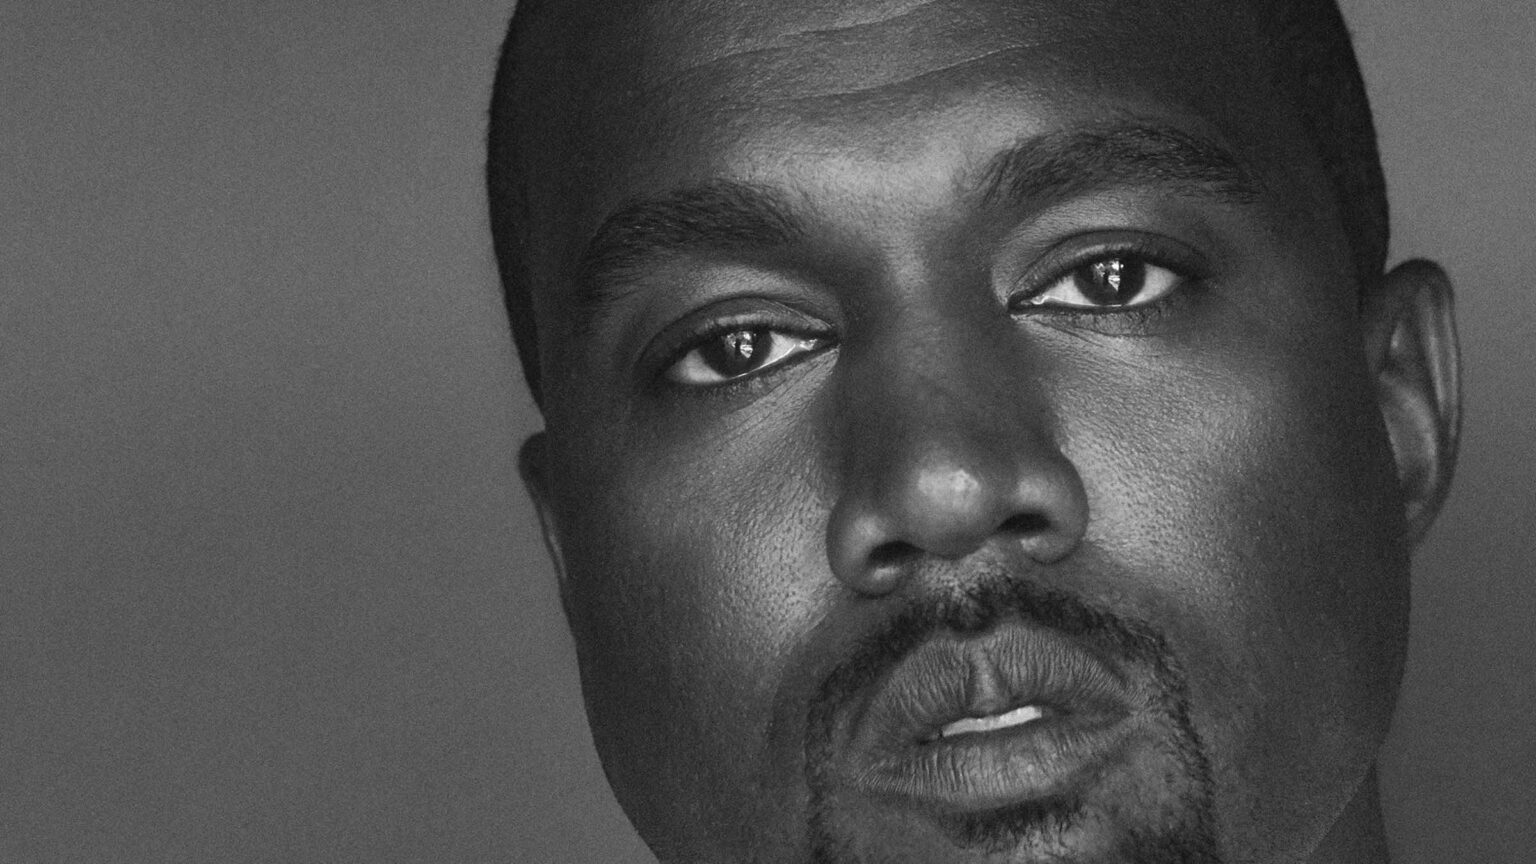 Kanye West actually getting a bid for president of the United States seemed like a tall order, so let's see if he intended to go through with it at all.